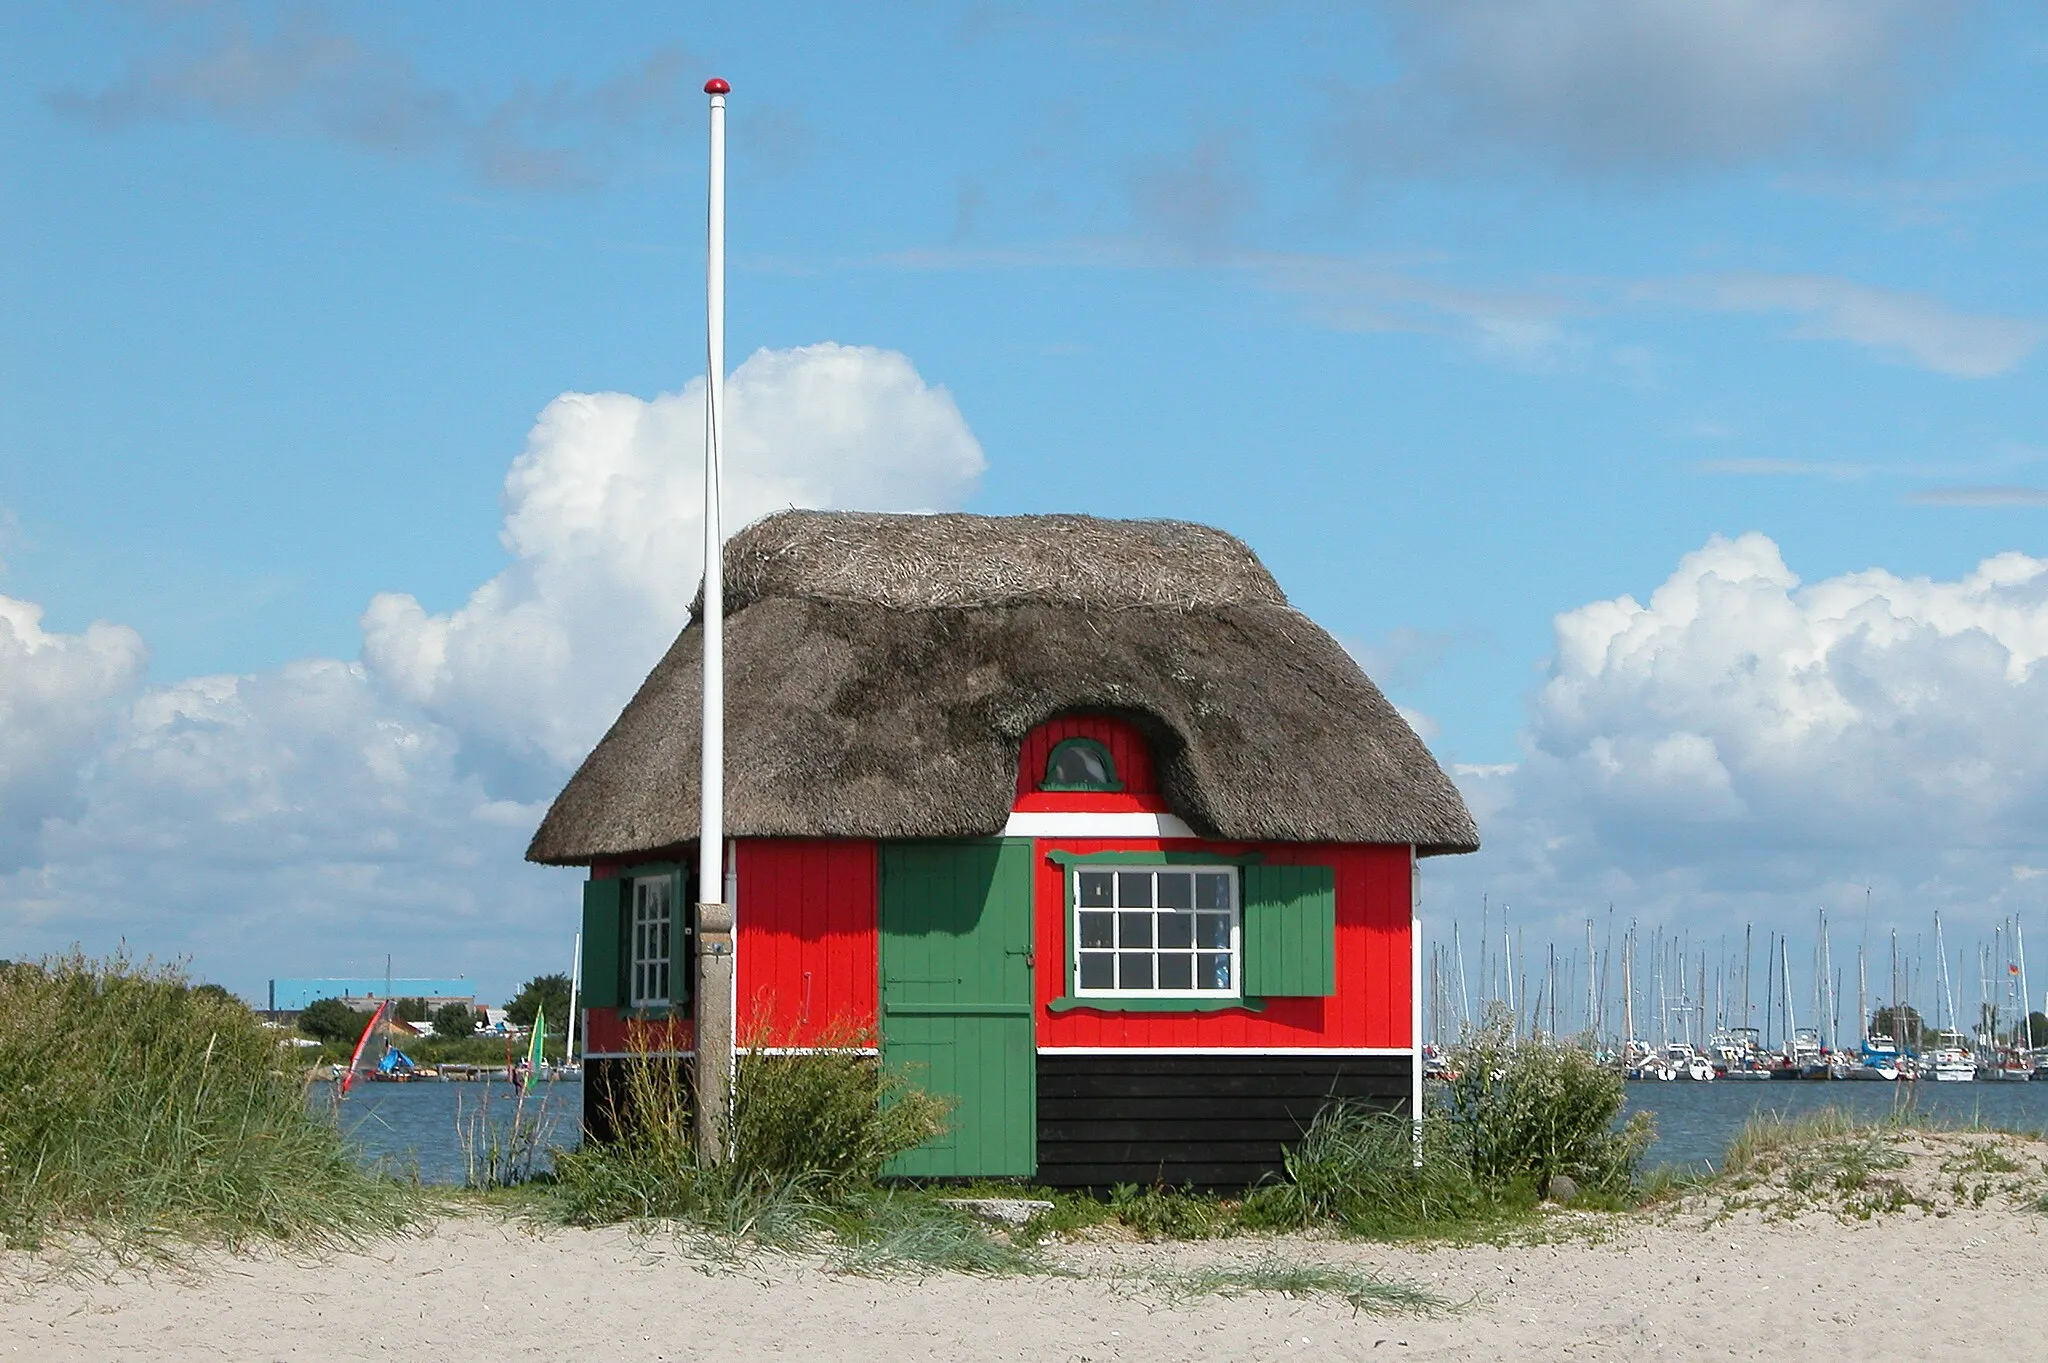 Photo showing: Colourful beach huts on the beach at Ærø Hale near Marstal on Ærø island, Denmark. Ærø Hale is 1.5 km long and consists of sand banks, beach embankments and tongues of land that change their shape continuously caused by the influence of the sea.